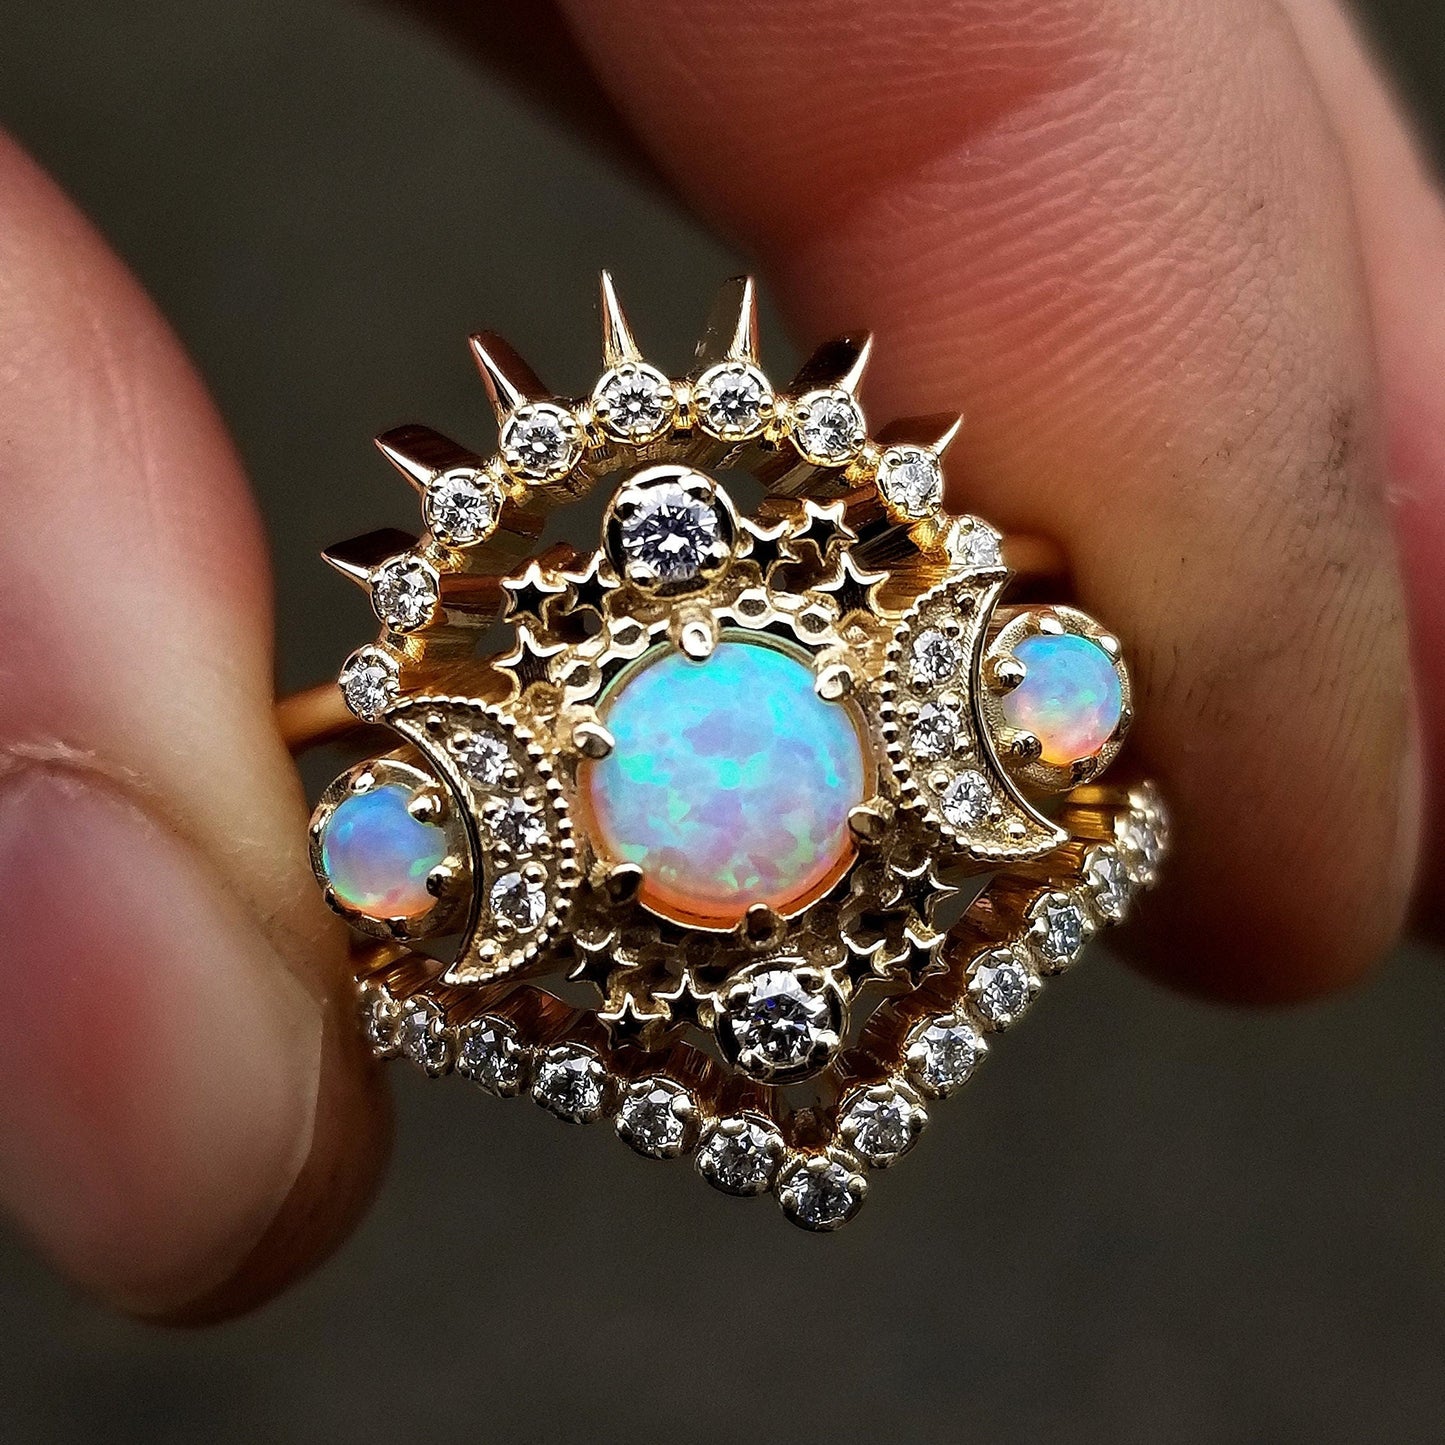 Load image into Gallery viewer, Opal Moon Celestial Engagement 3 Ring Set with Crescent Moons, Stars and Diamonds - Boho Pagan Wedding Set - 14k Yellow Gold
